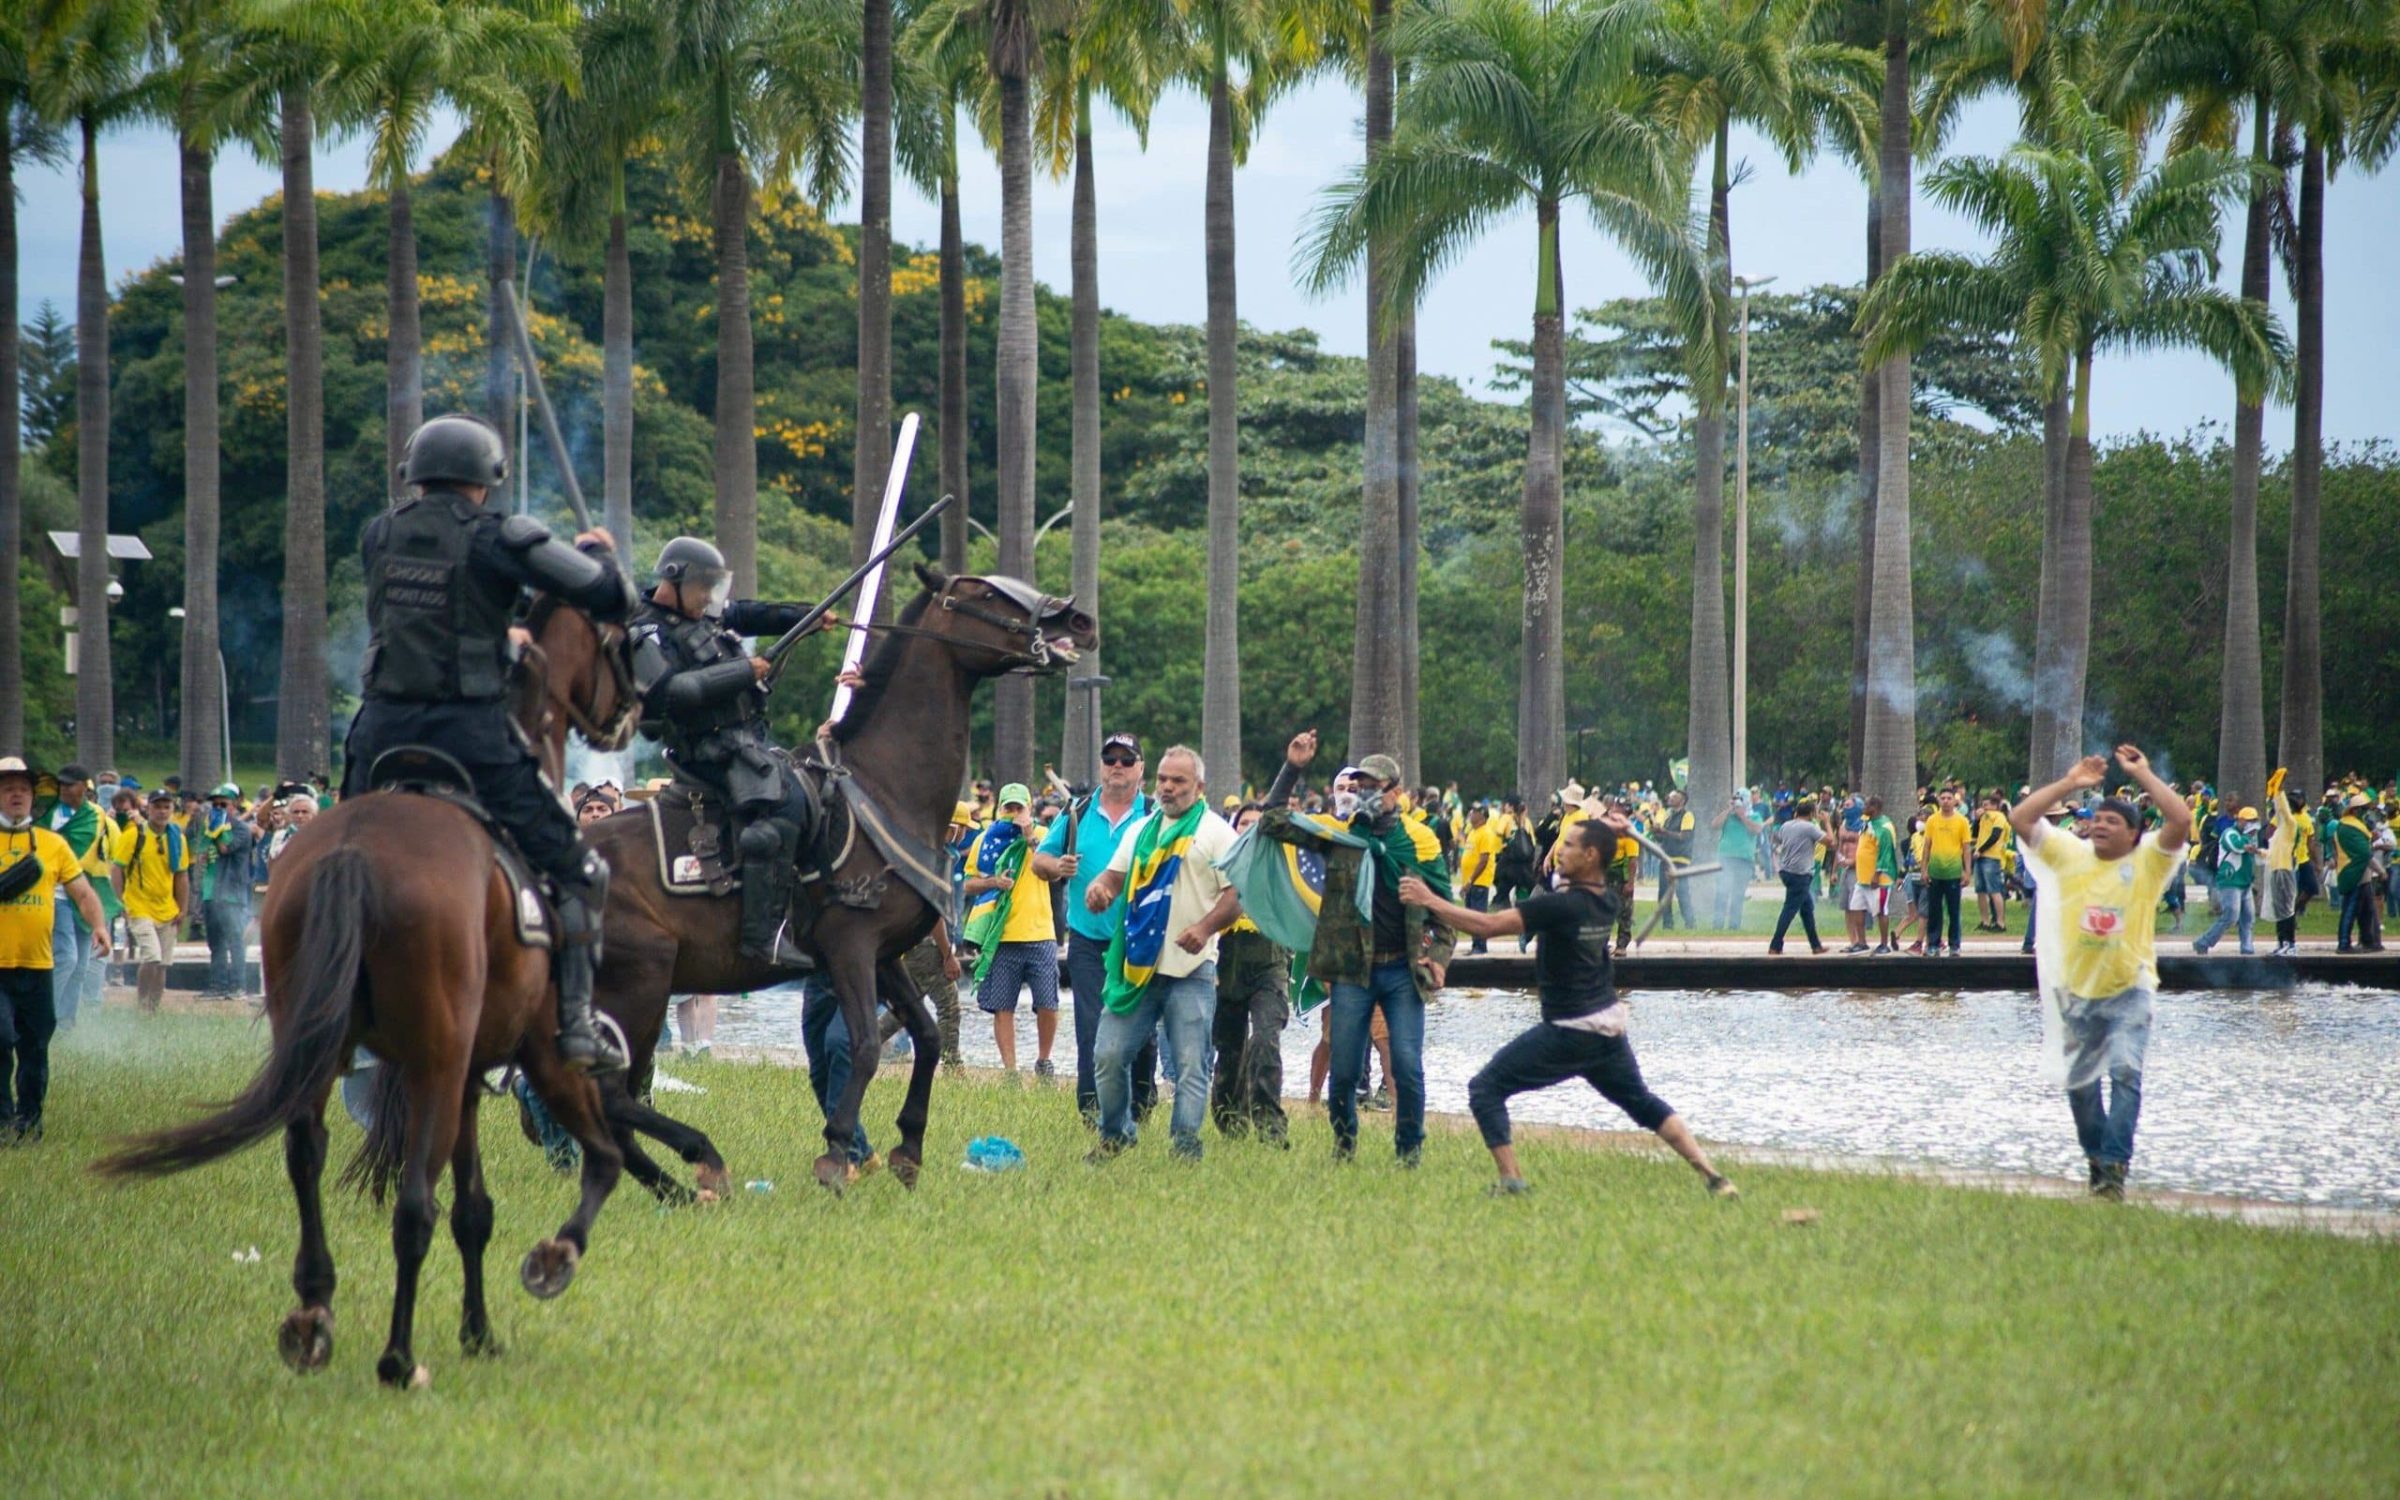 Brasilia, Brazil. 08th Jan, 2023. Brasilia, Brazil. 08th Jan, 2023. Supporters of former Brazilian President Bolsonaro clash with mounted police in the capital. Supporters of former Brazilian President Bolsonaro have stormed the Congress in the capital Br